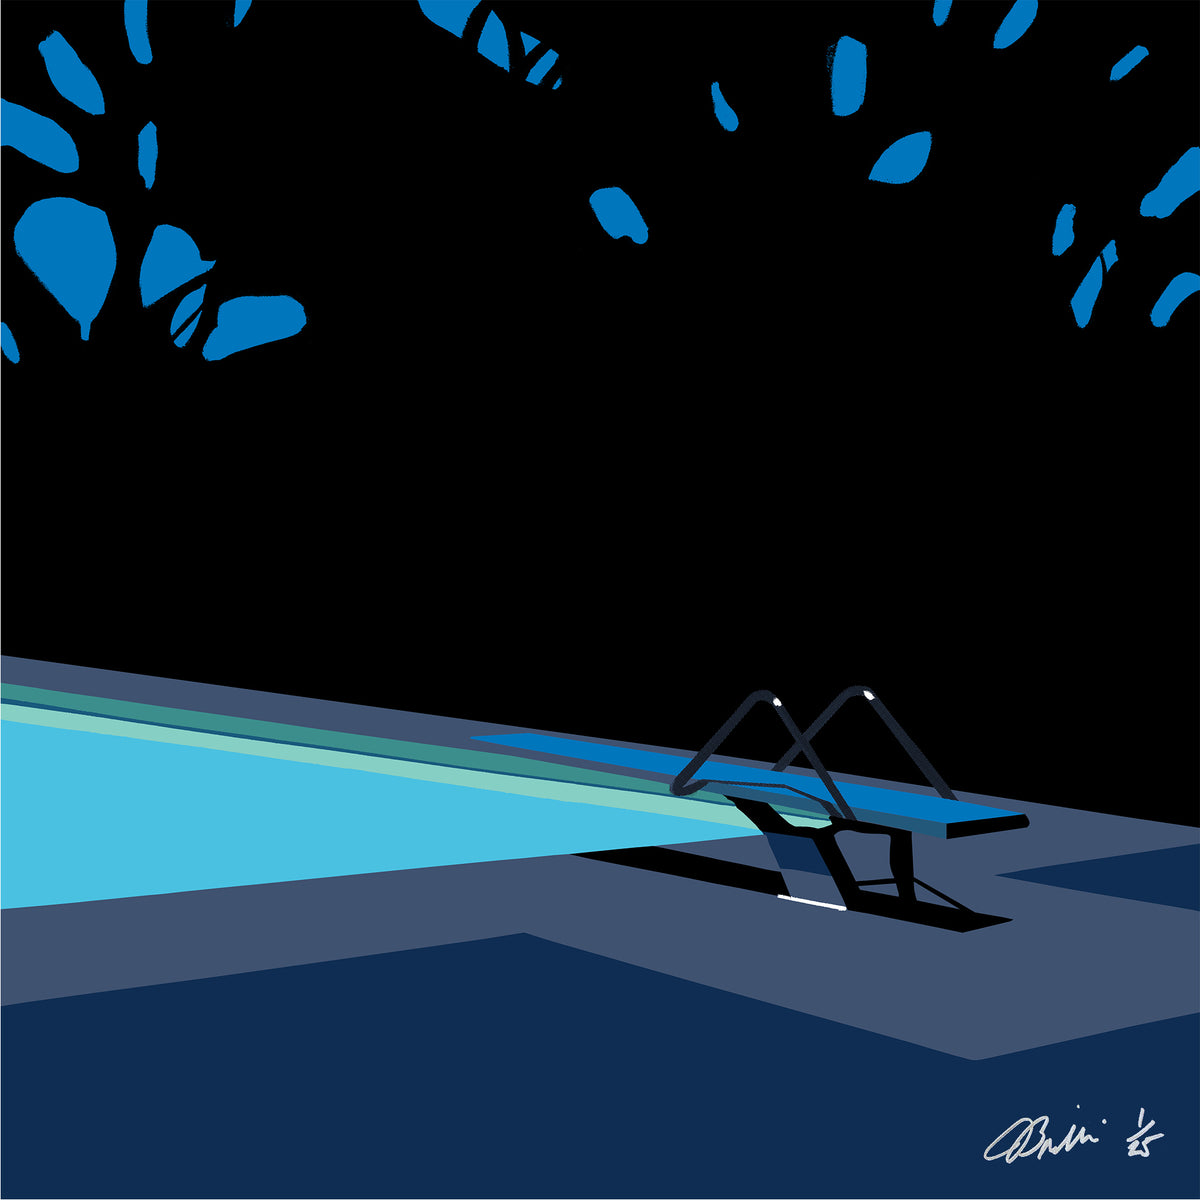 Jessica Brilli &quot;Night Swimming [Leave the World Behind]&quot; - Screen Printed Edition of 25 - 15 x 15&quot;